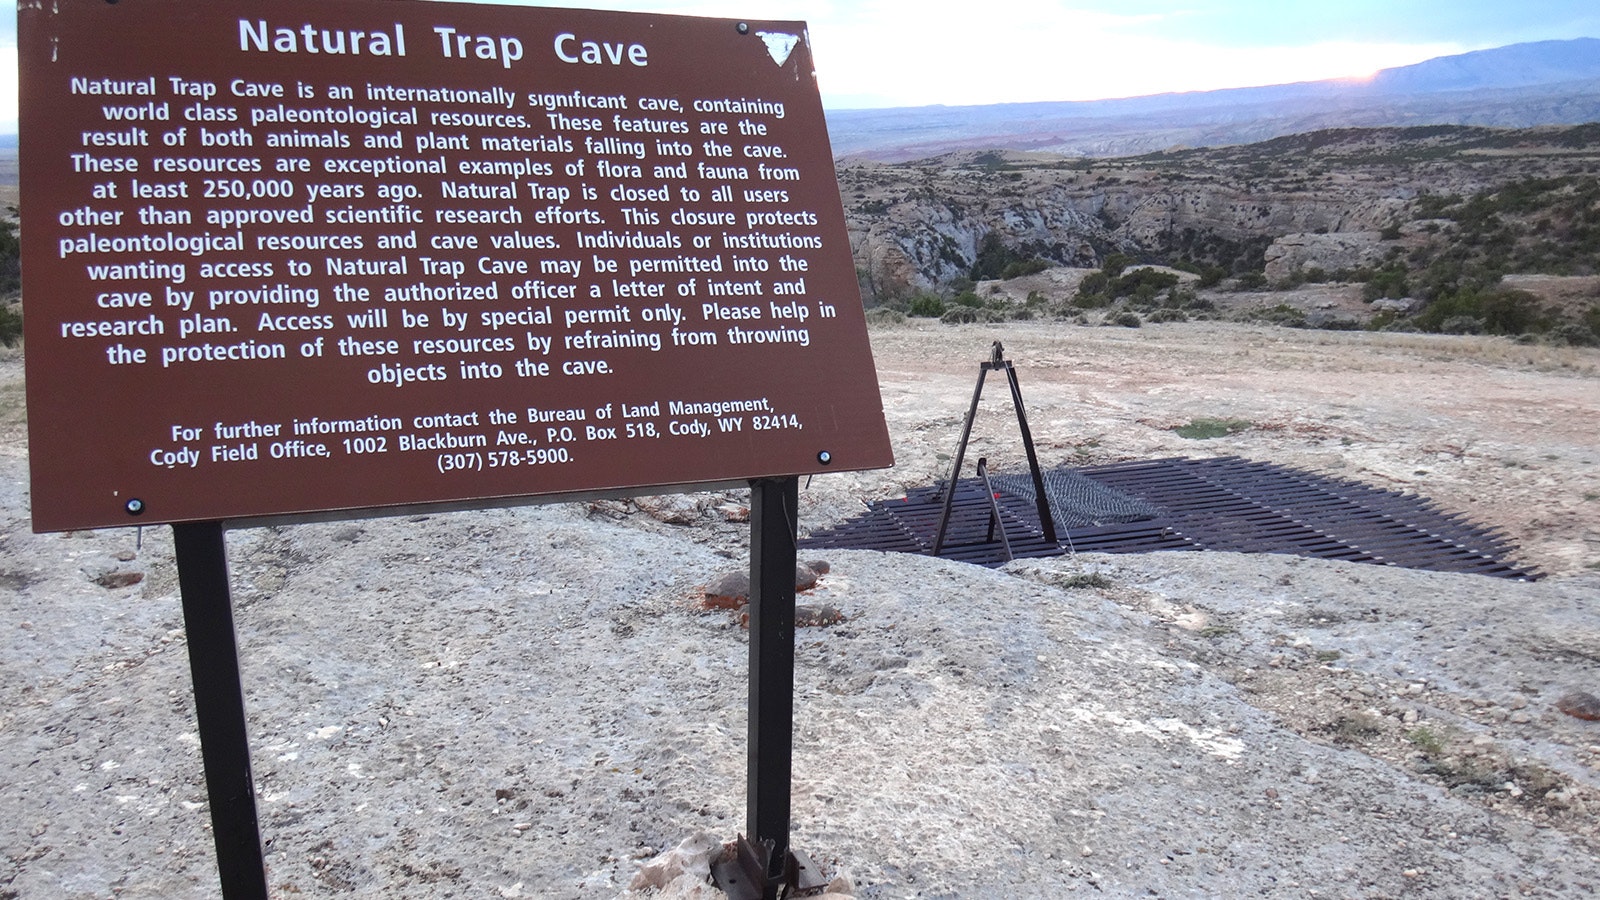 This sign tells the story of Natural Trap Cave, which is covered nearby to prevent people and animals from falling into it.